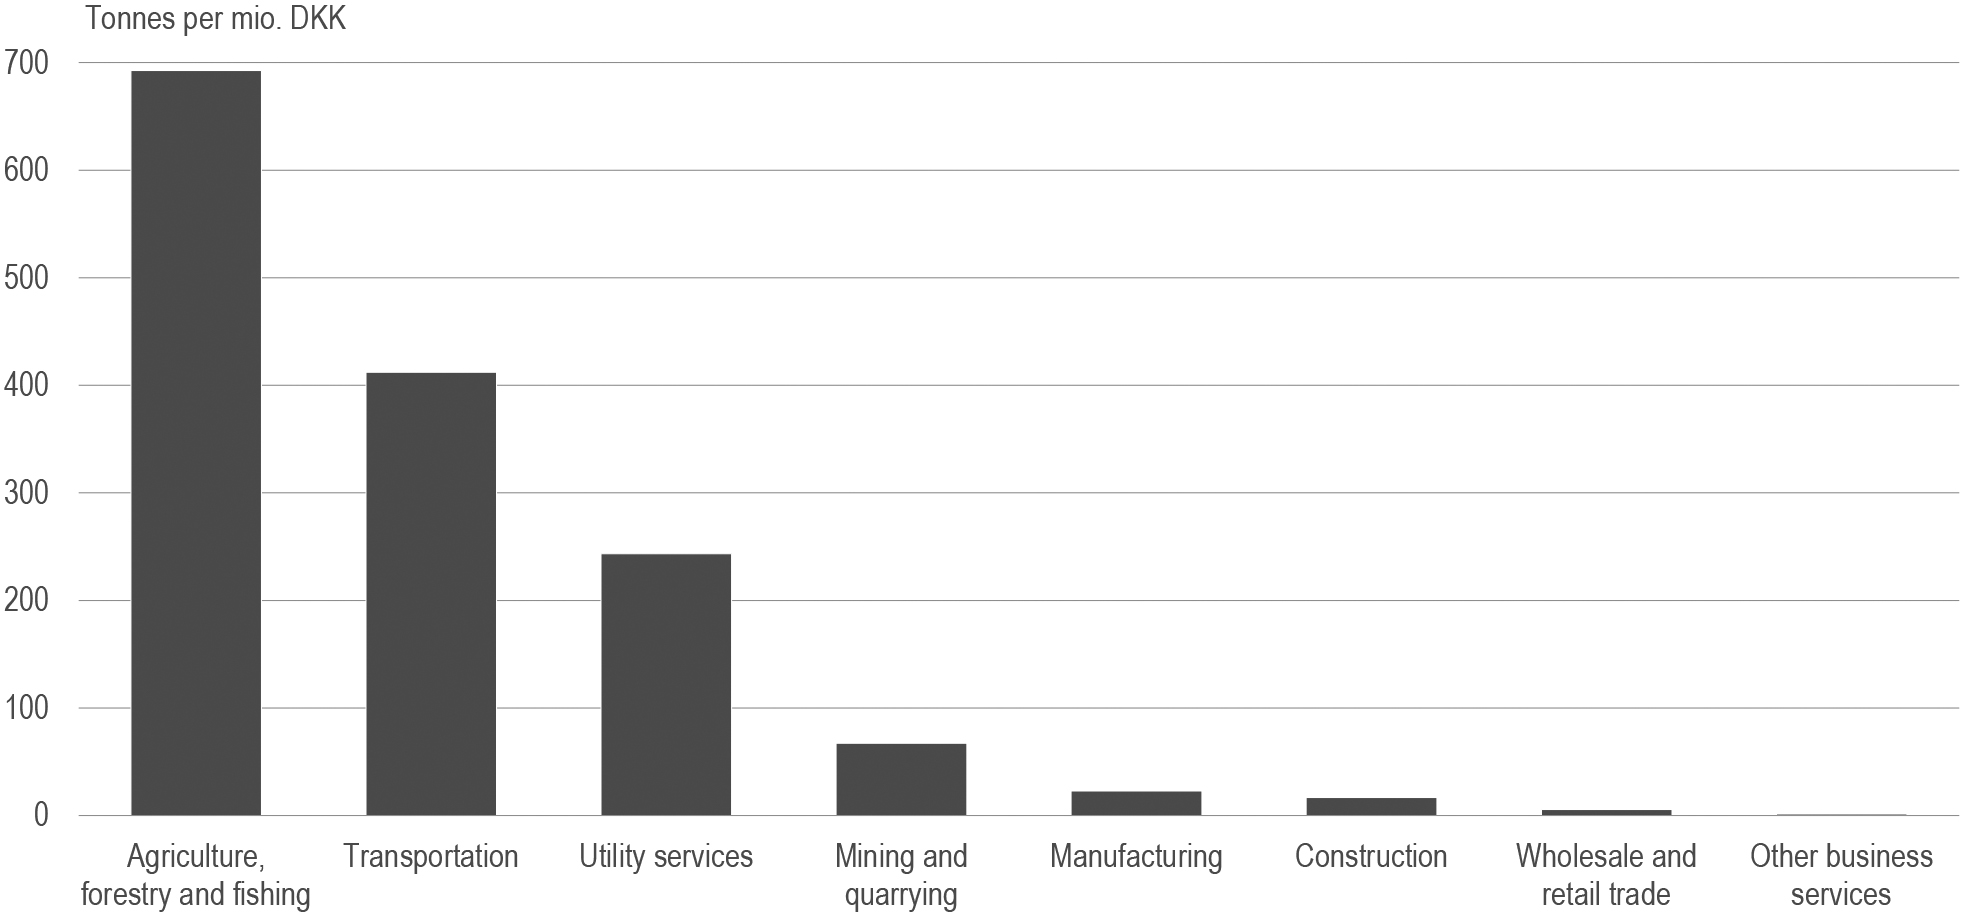 CO2-emission over Gross Value Added in the Danish business sector, by type of industry. 2018. Source: Statistics Denmark, Emission statistics and National Accounts Statistics (GVA in constant prices). Note: The emission from renewable energy sources is not included. Bunkering abroad is included.